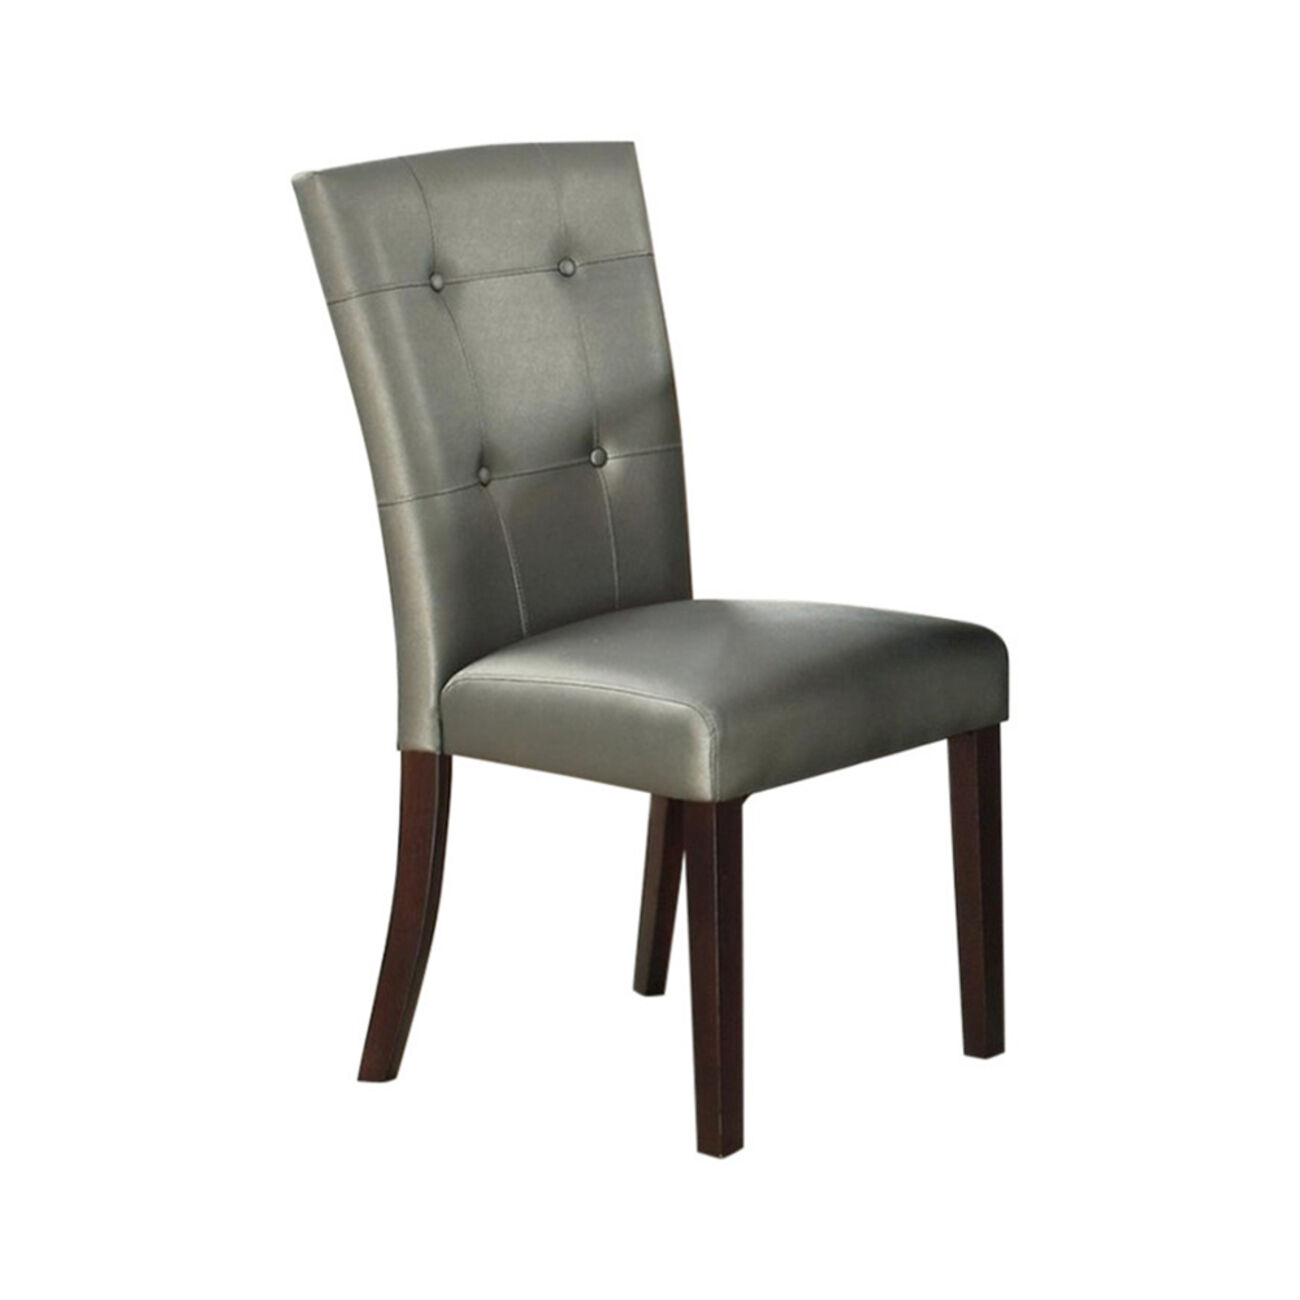 Button Tufted Faux Leather Wooden Dining Chair, Set Of 2,Silver